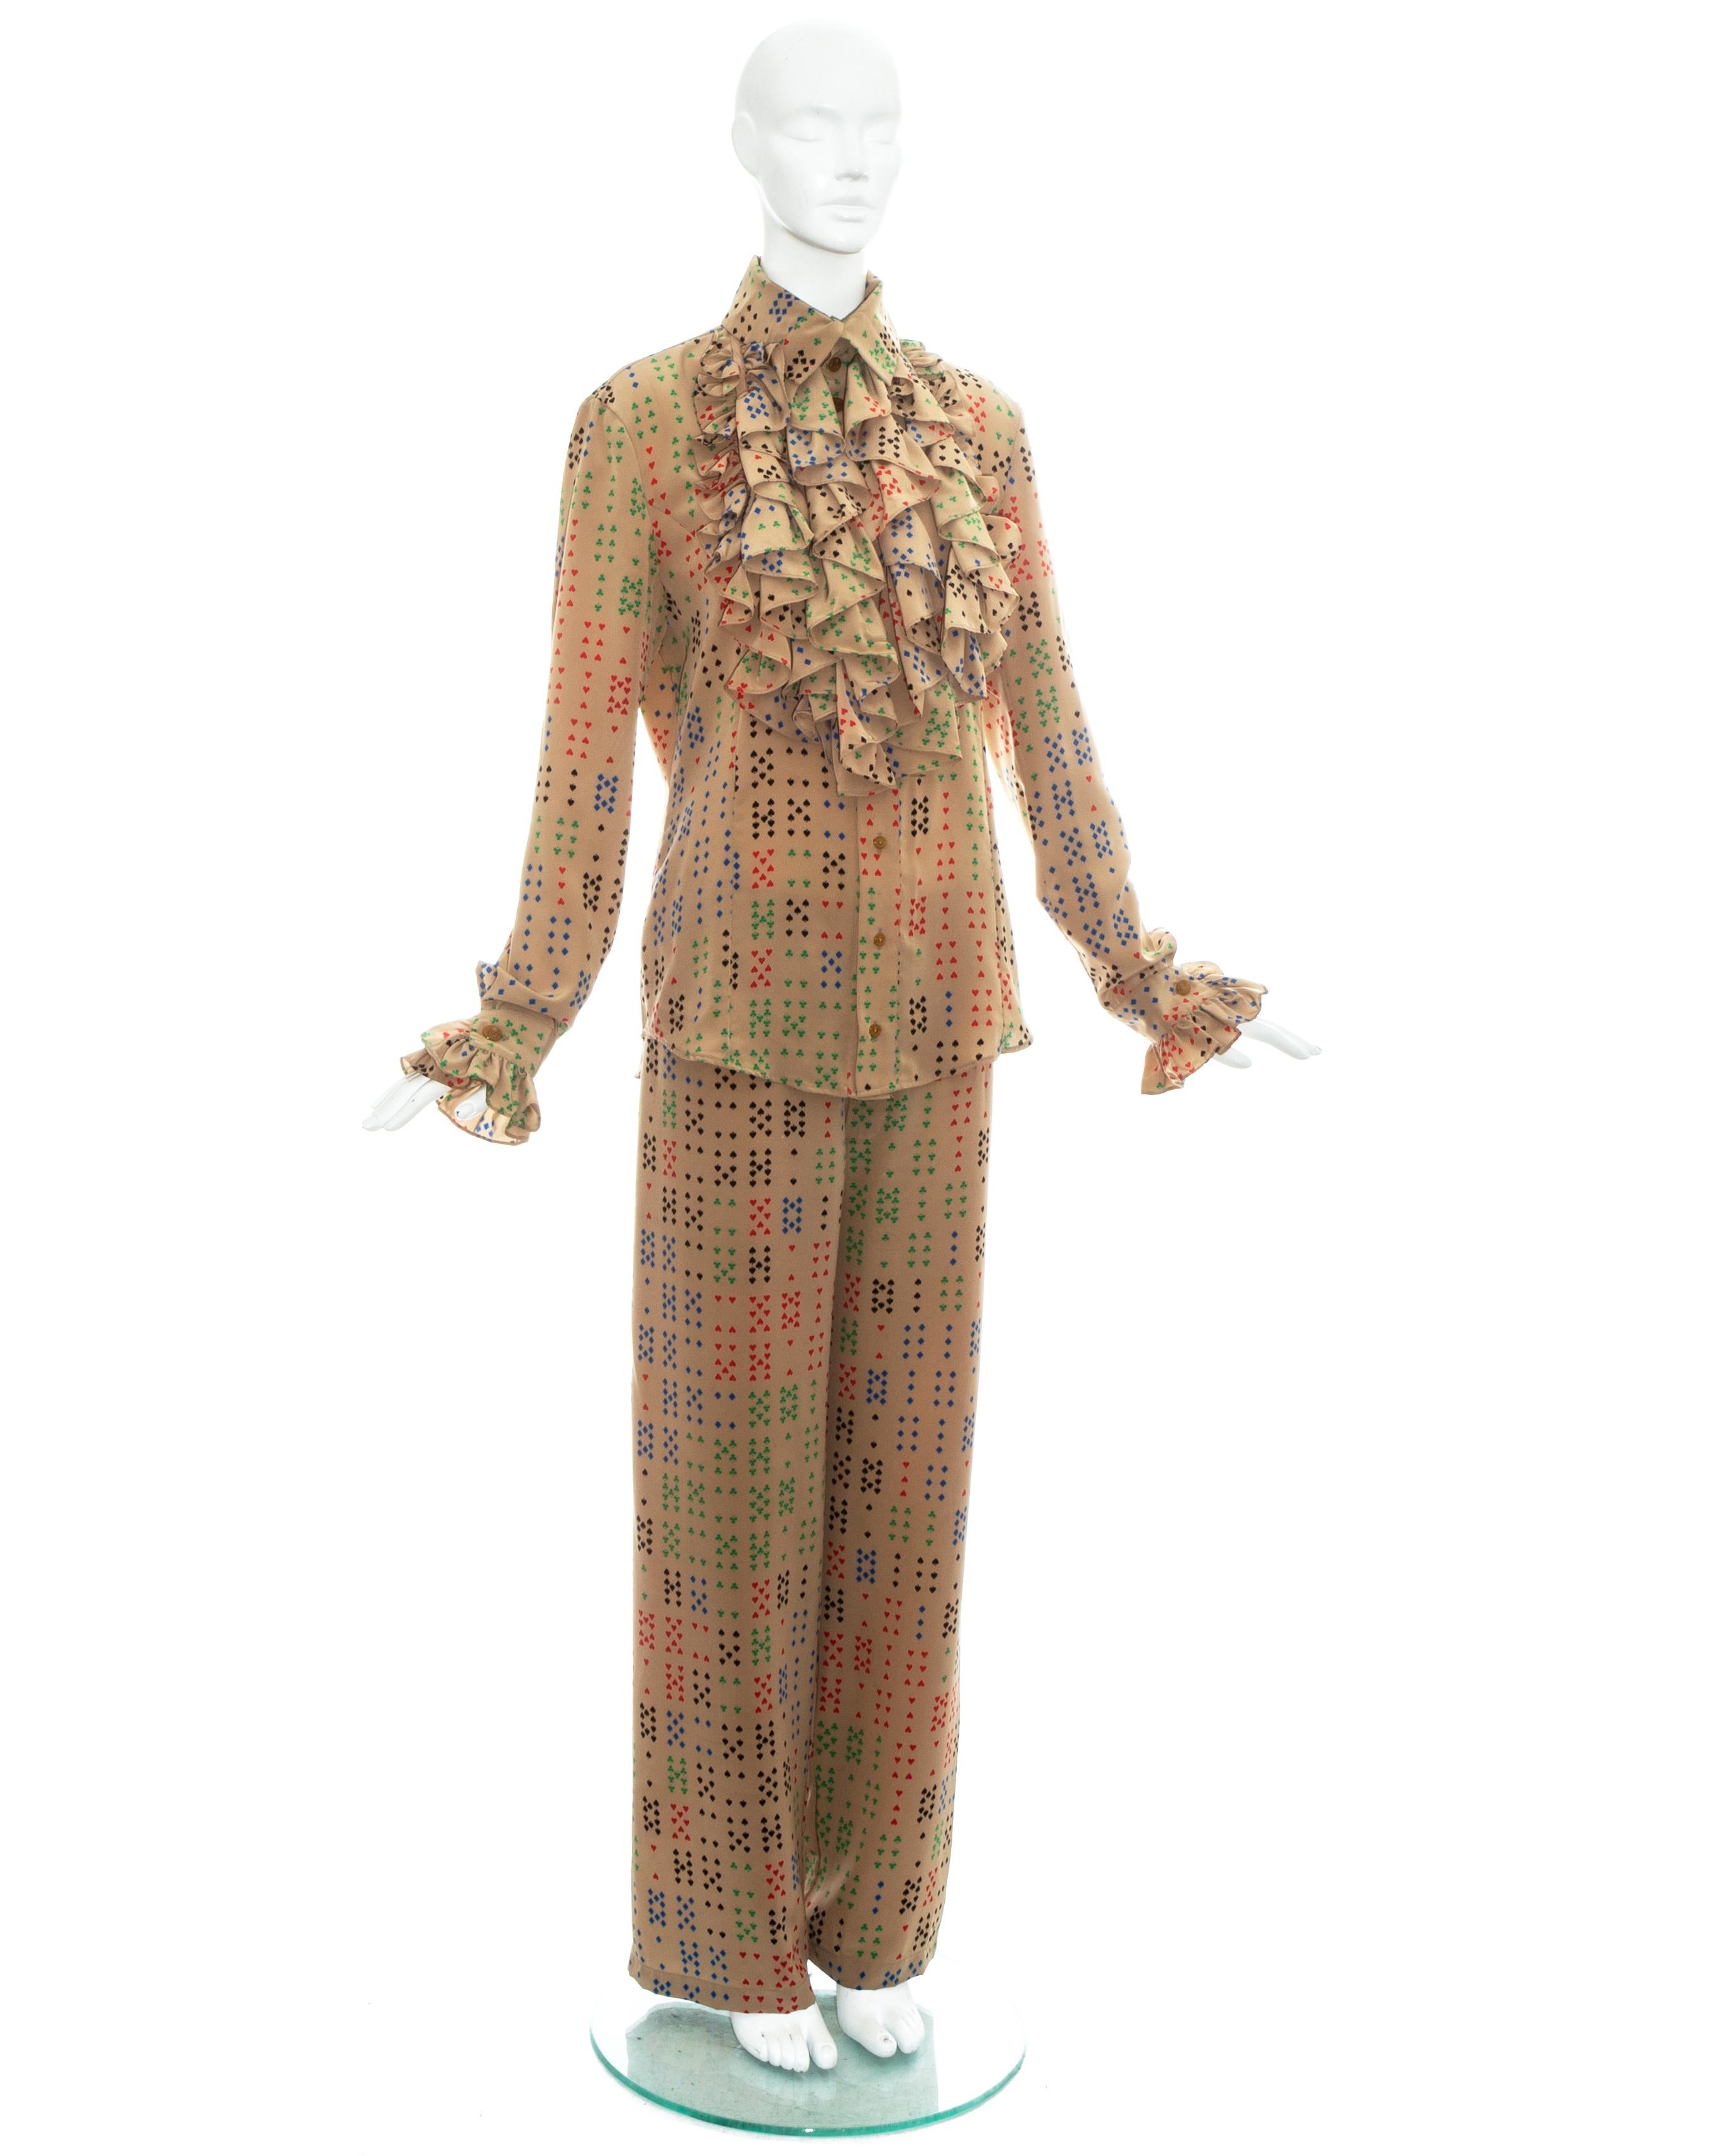 Vivienne Westwood men's tan polyester pant suit with playing card symbols print. Wide leg pants with elastic waistband and ruffled shirt.

Spring-Summer 1997